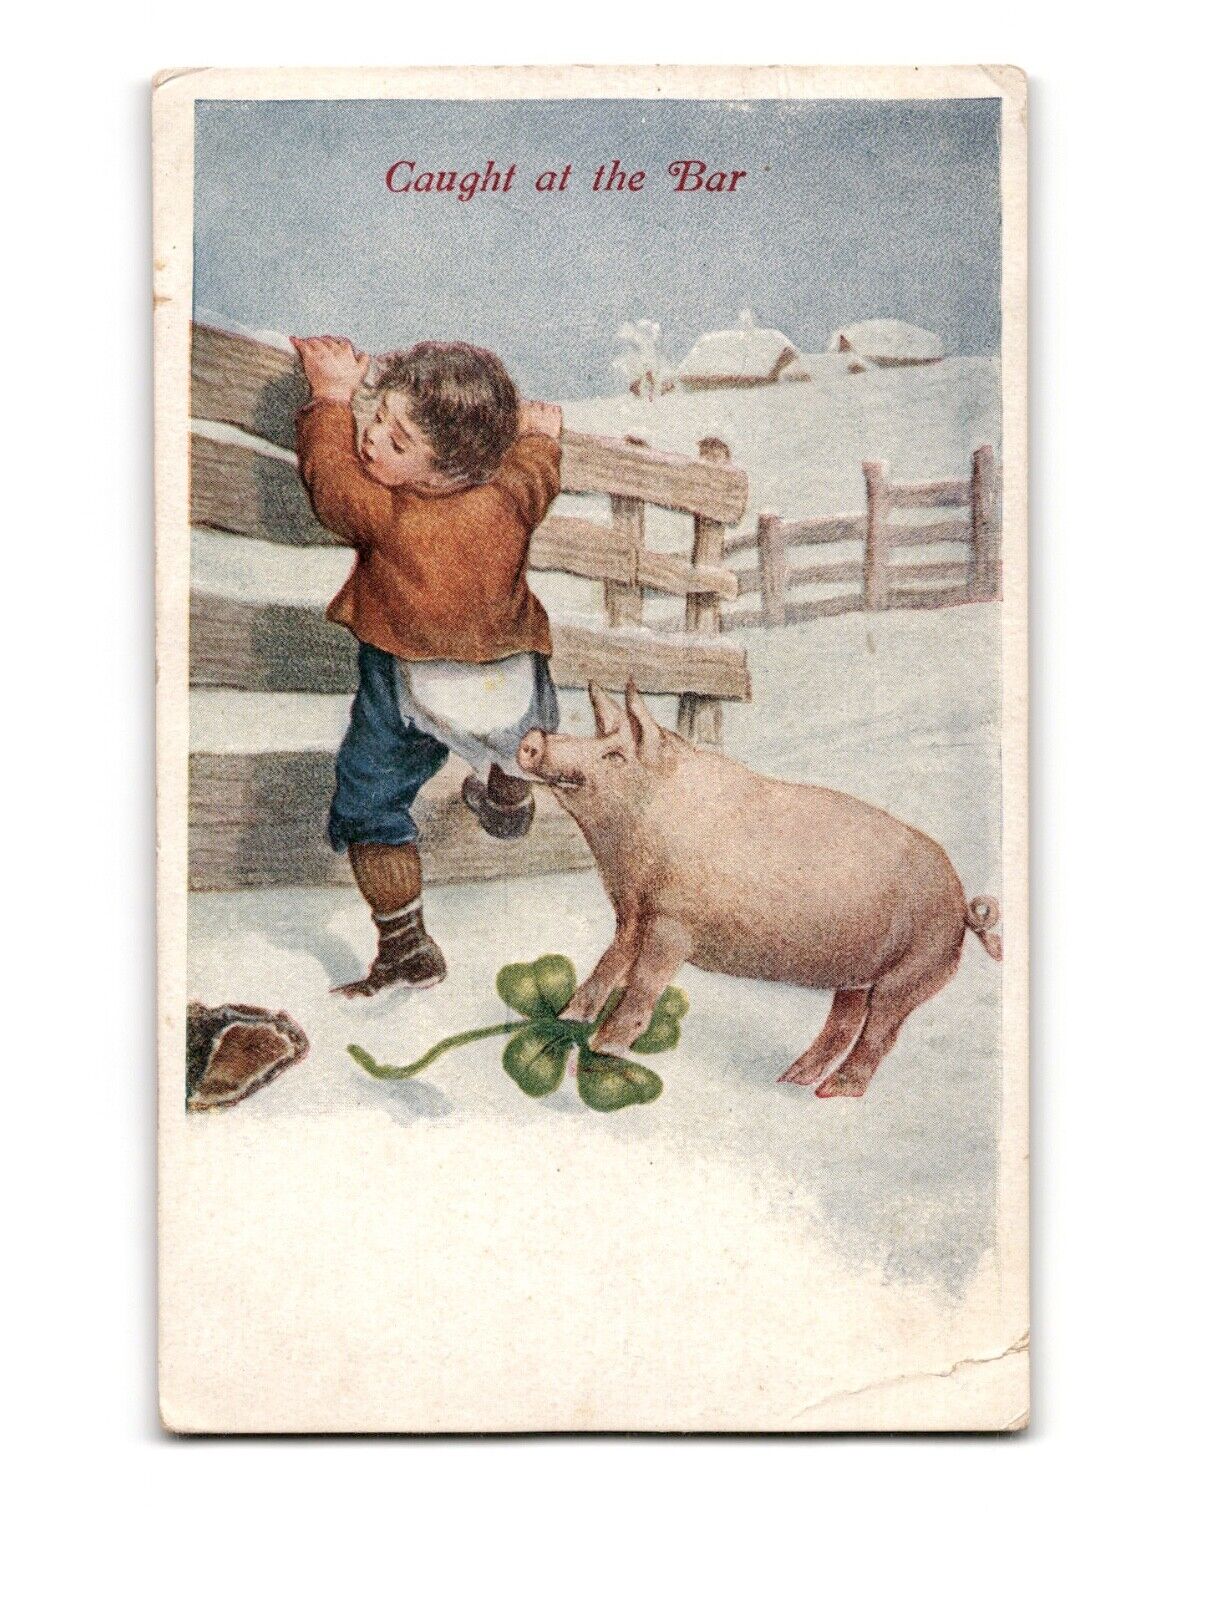 Vintage Postcard 'Caught at the Bar' - Boy & Pig - Early 1900s Collectible